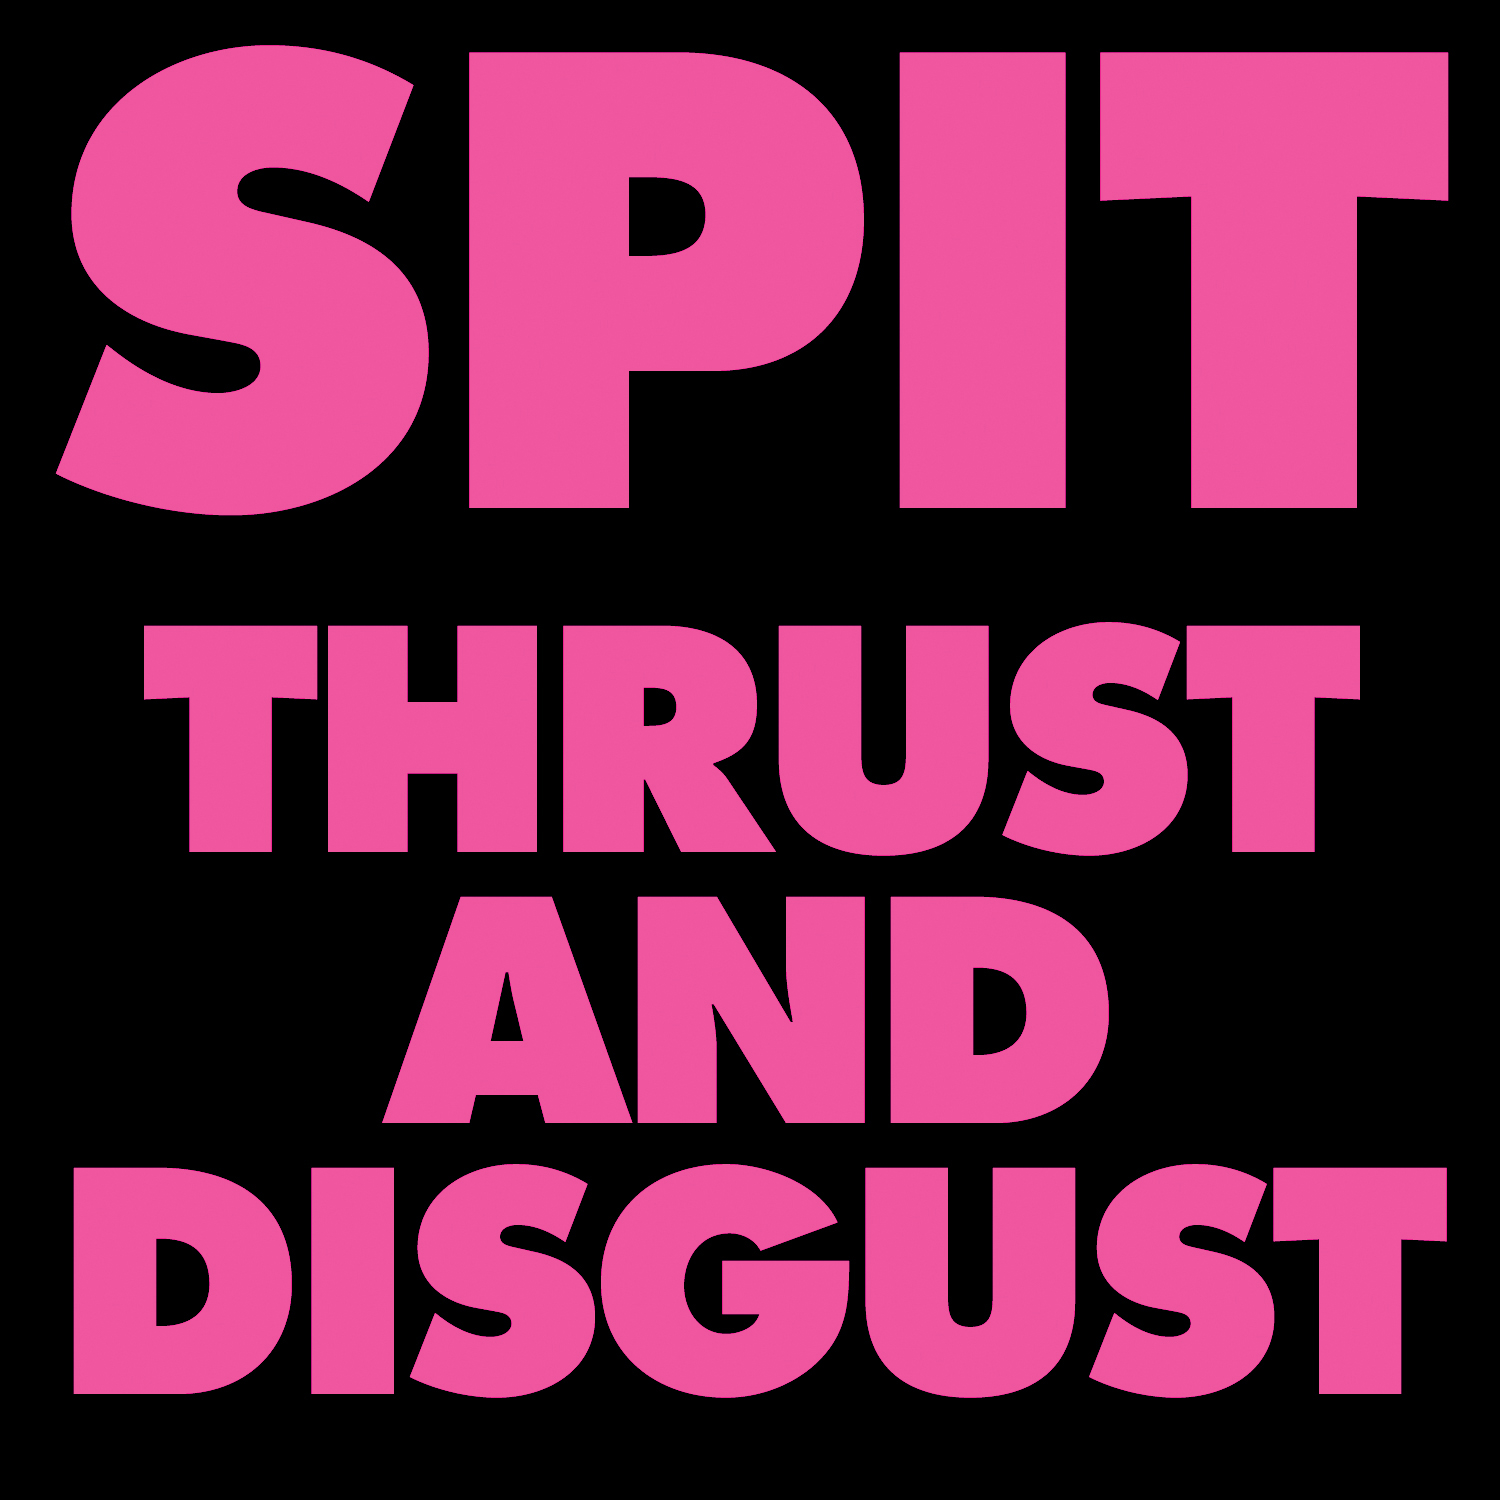 Thrust and Disgust